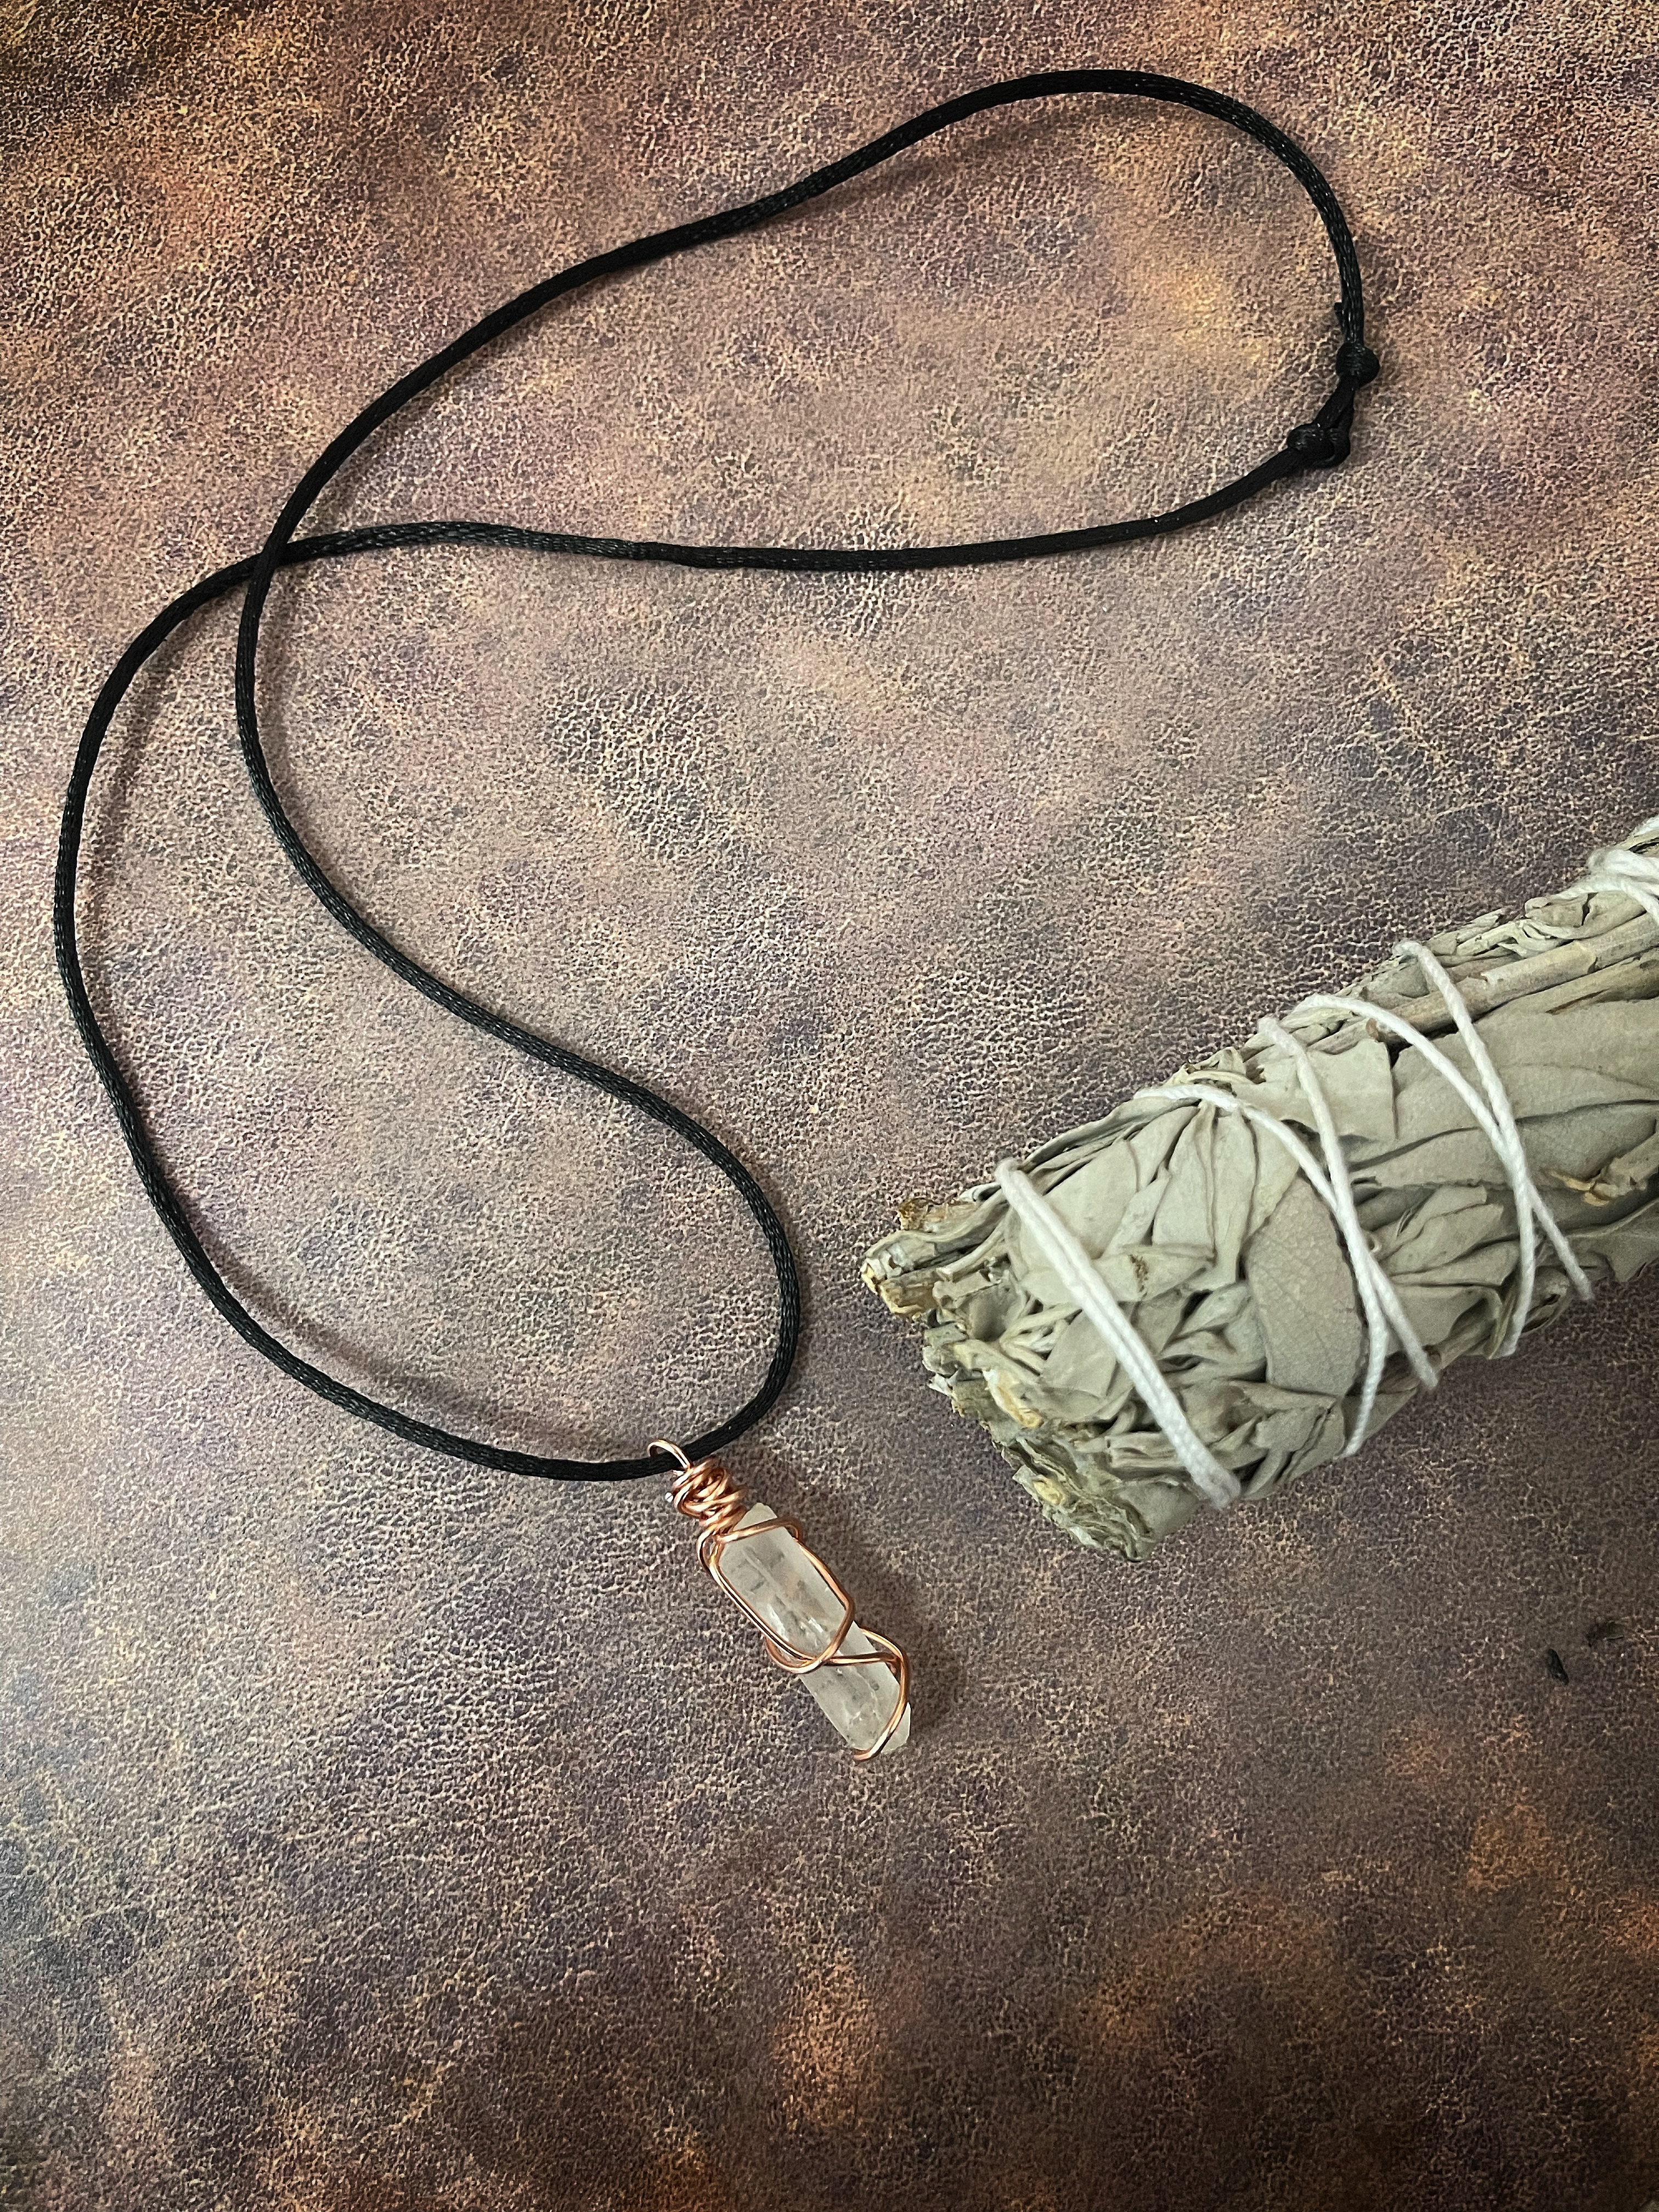 This Clear Quartz hand wrapped in ete inalum is made with love by The Herbal Oracle! Shop more unique gift ideas today with Spots Initiatives, the best way to support creators.